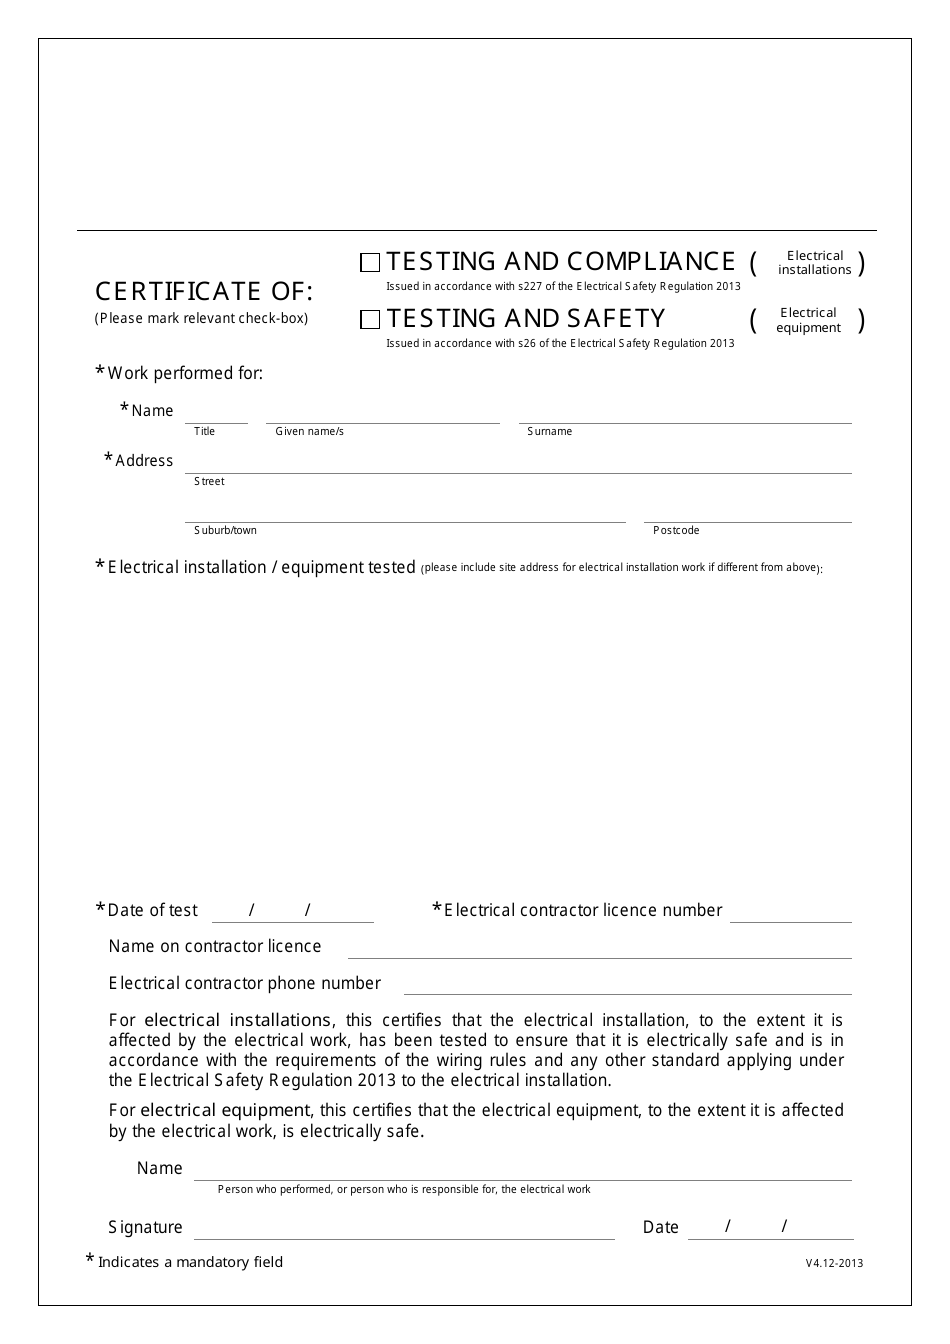 Queensland Australia Certificate of Compliance Download Printable Throughout Certificate Of Compliance Template